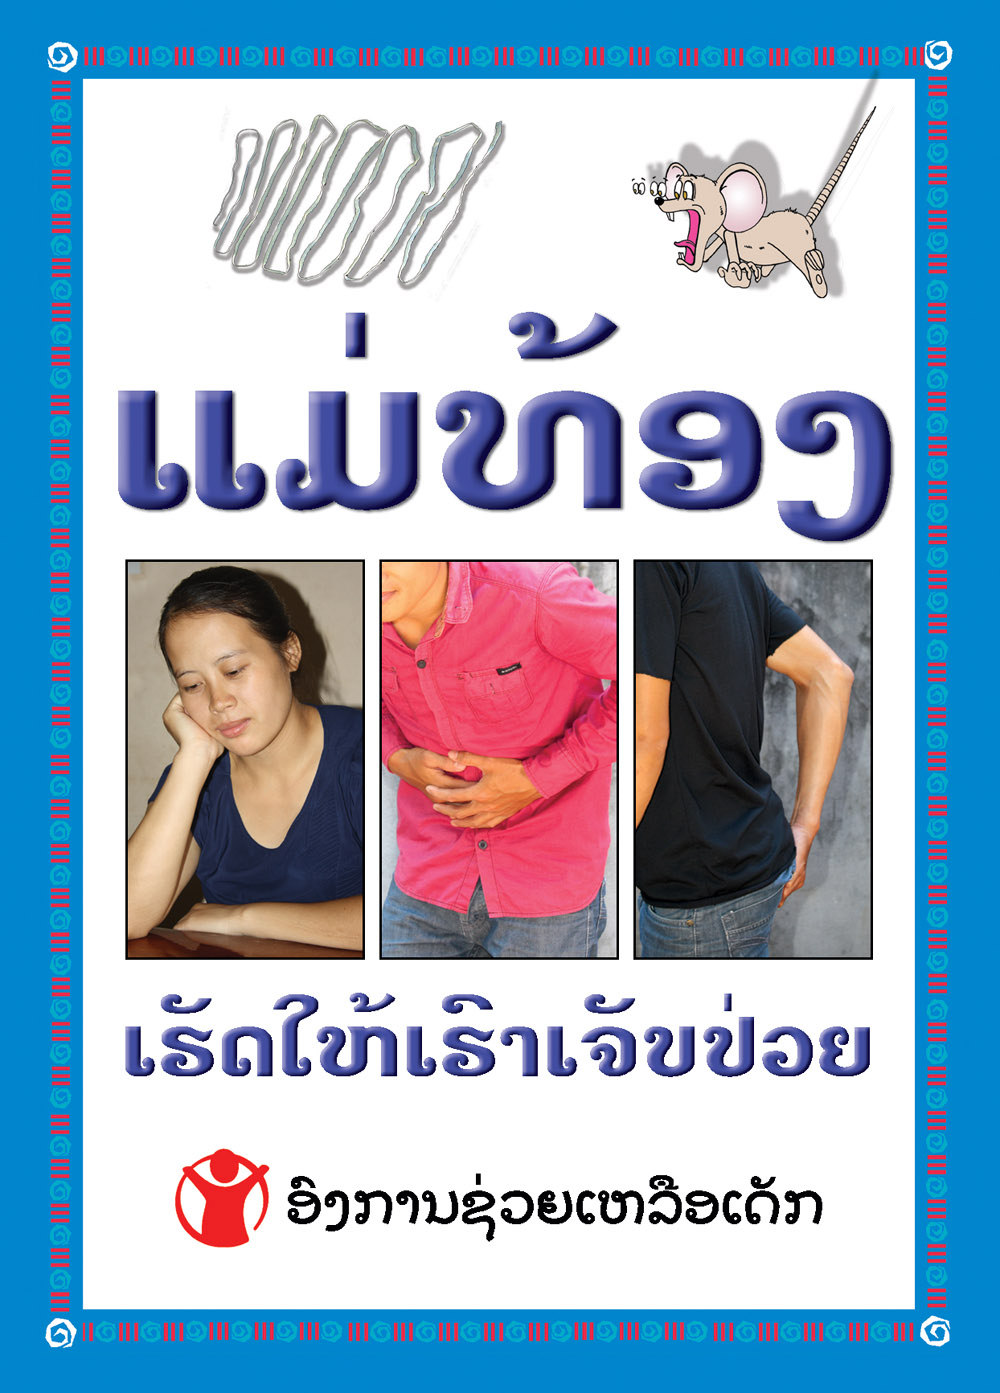 Worms Make You Sick large book cover, published in Lao language